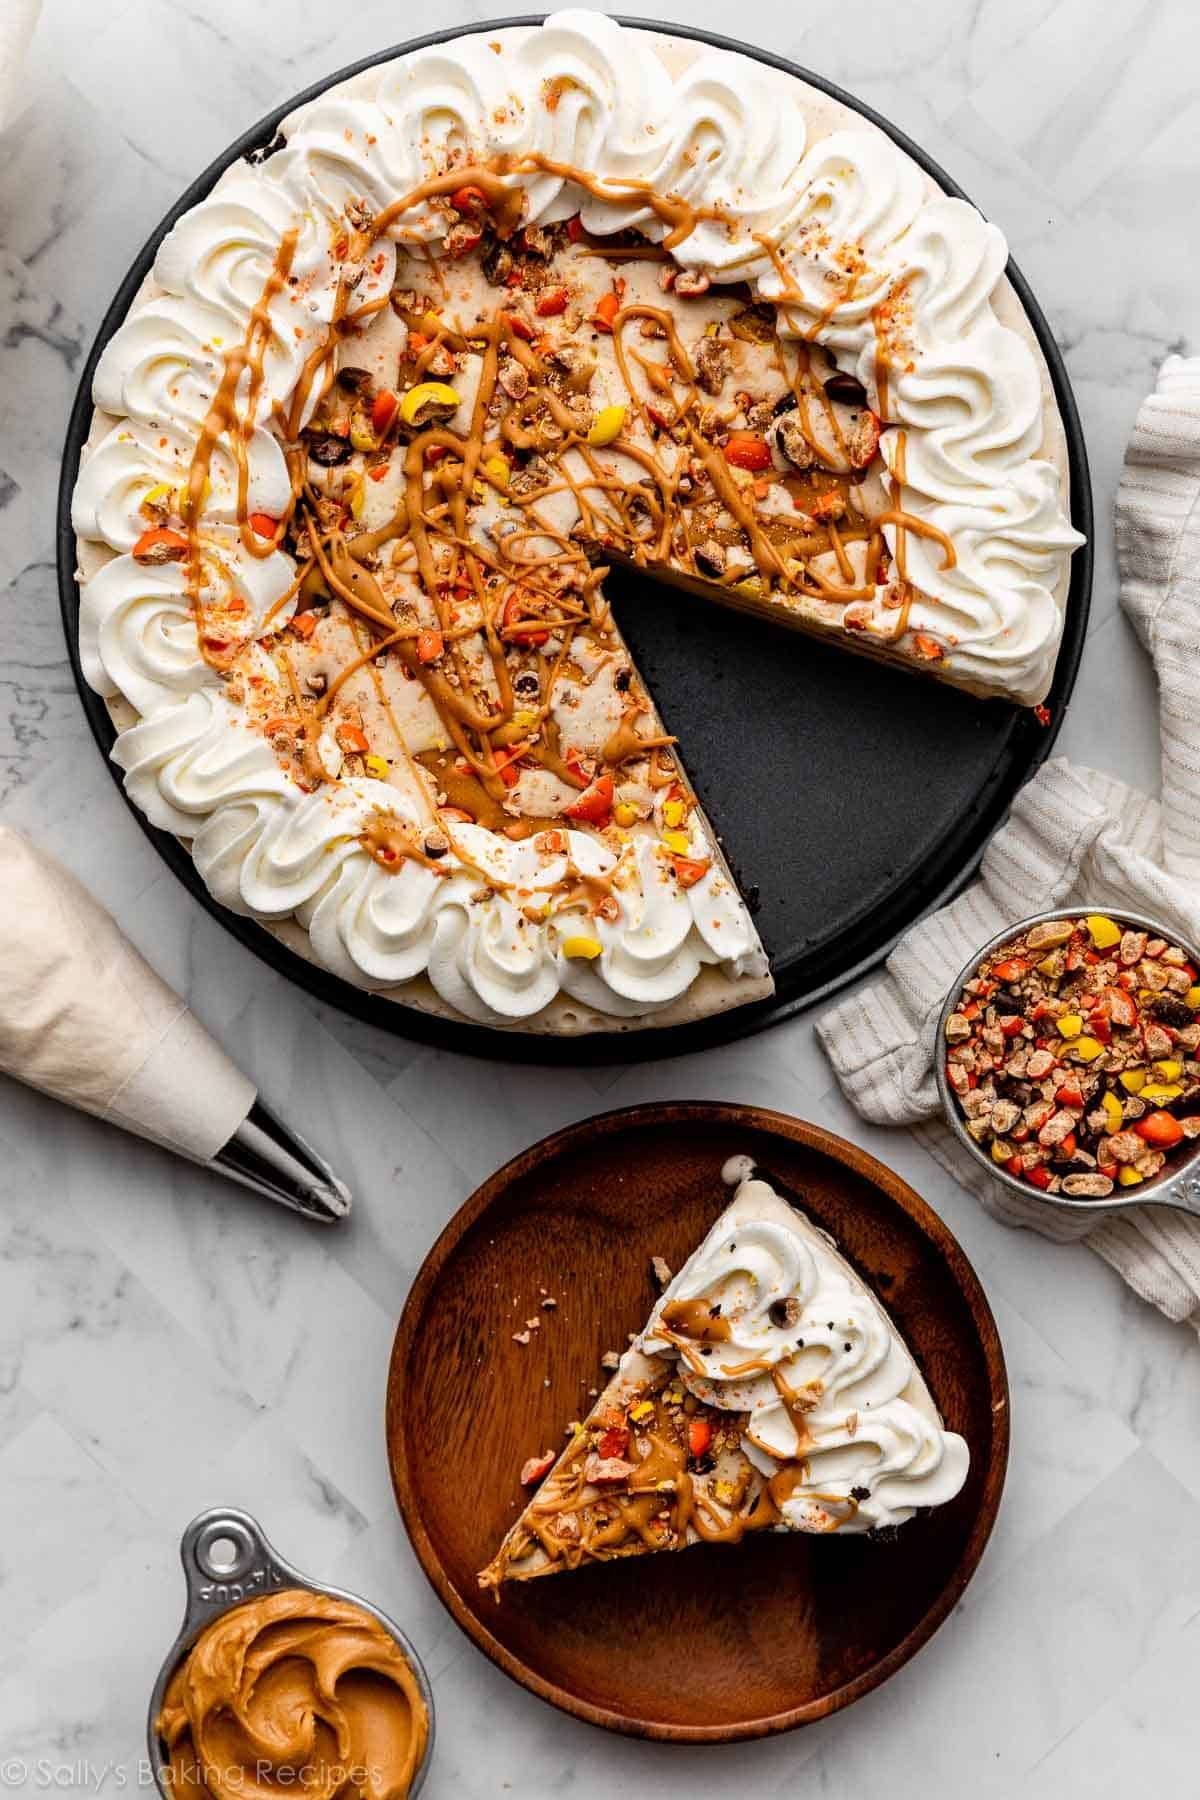 peanut butter ice cream pie on springform pan bottom and slice shown on wooden plate.